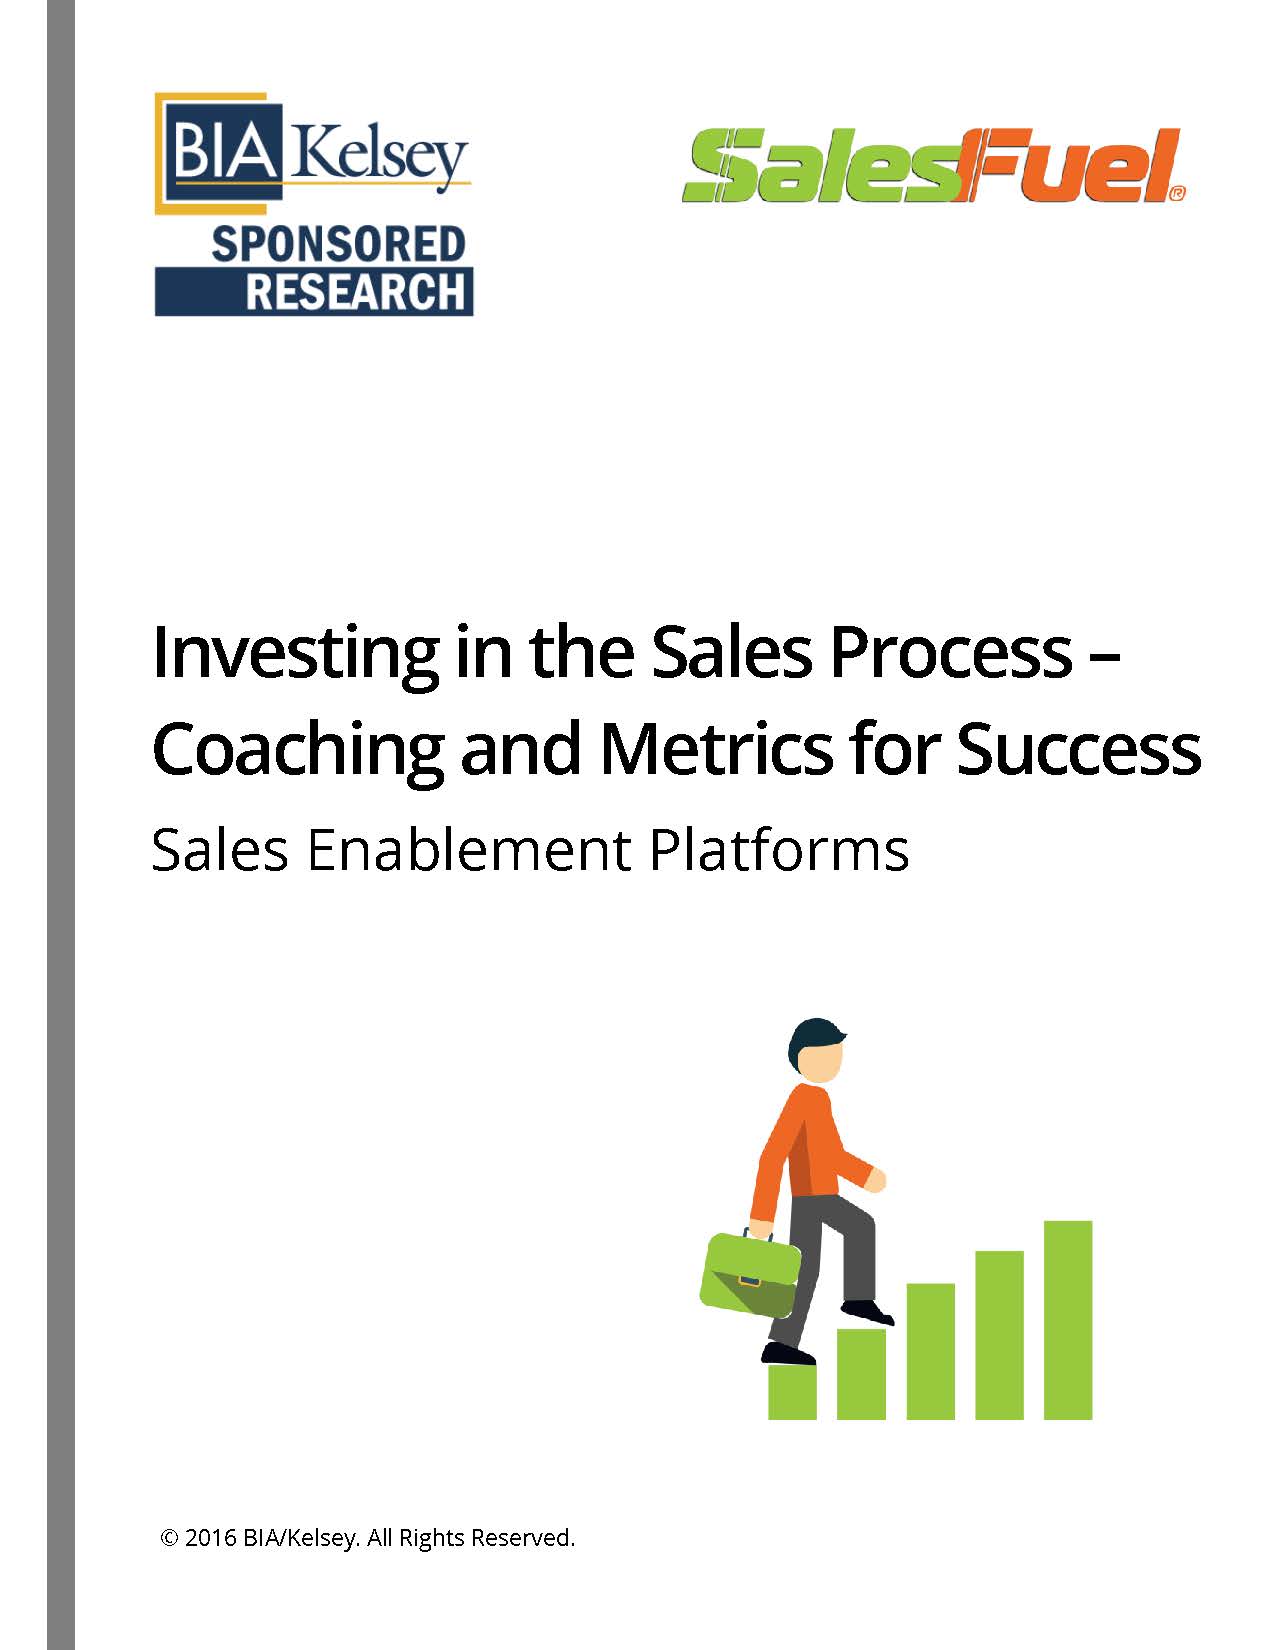 New BIA/Kelsey Report: Using Data To Optimize Sales Organizations